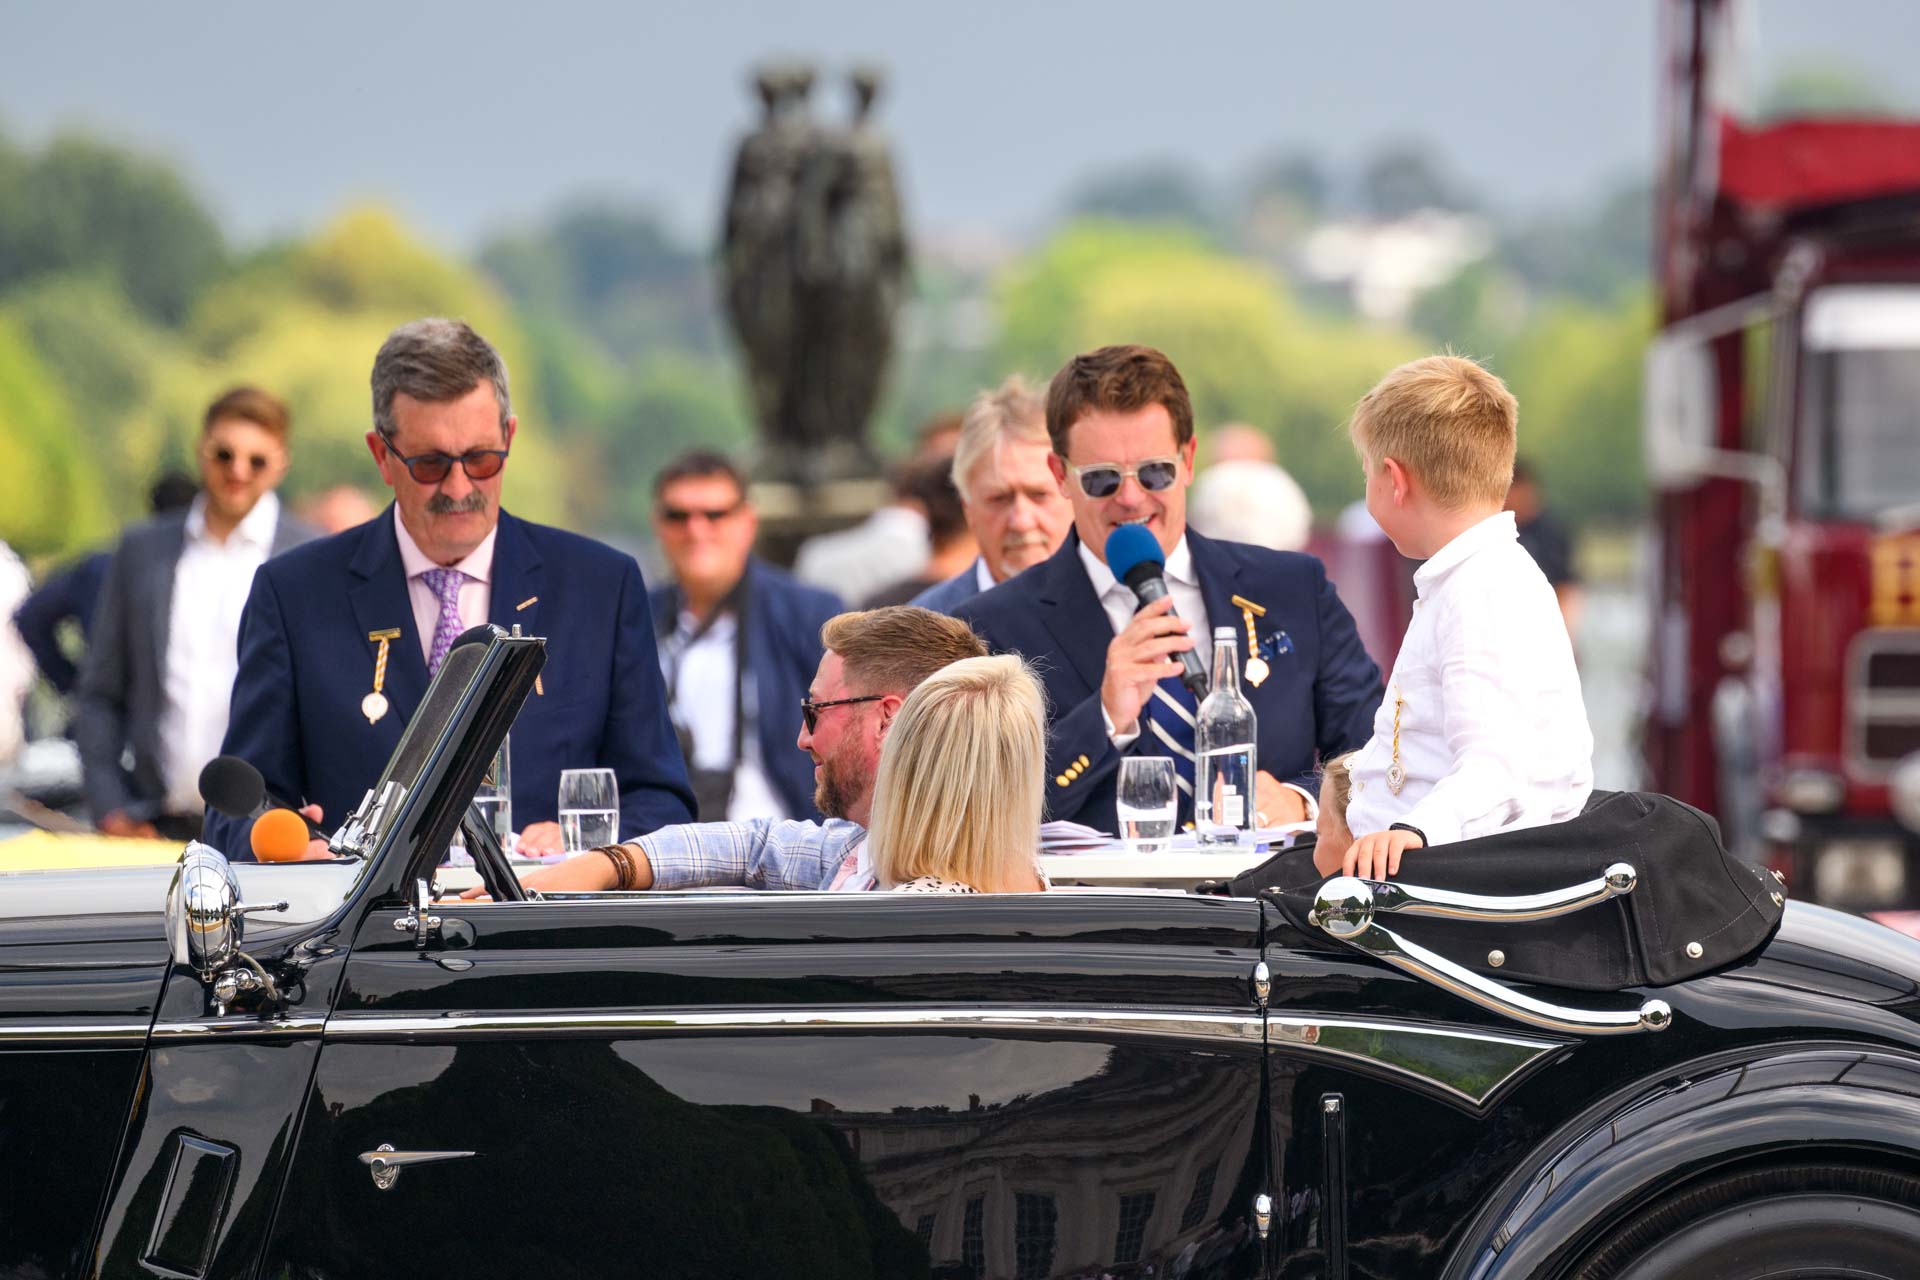 Interviews at Concours of Elegance